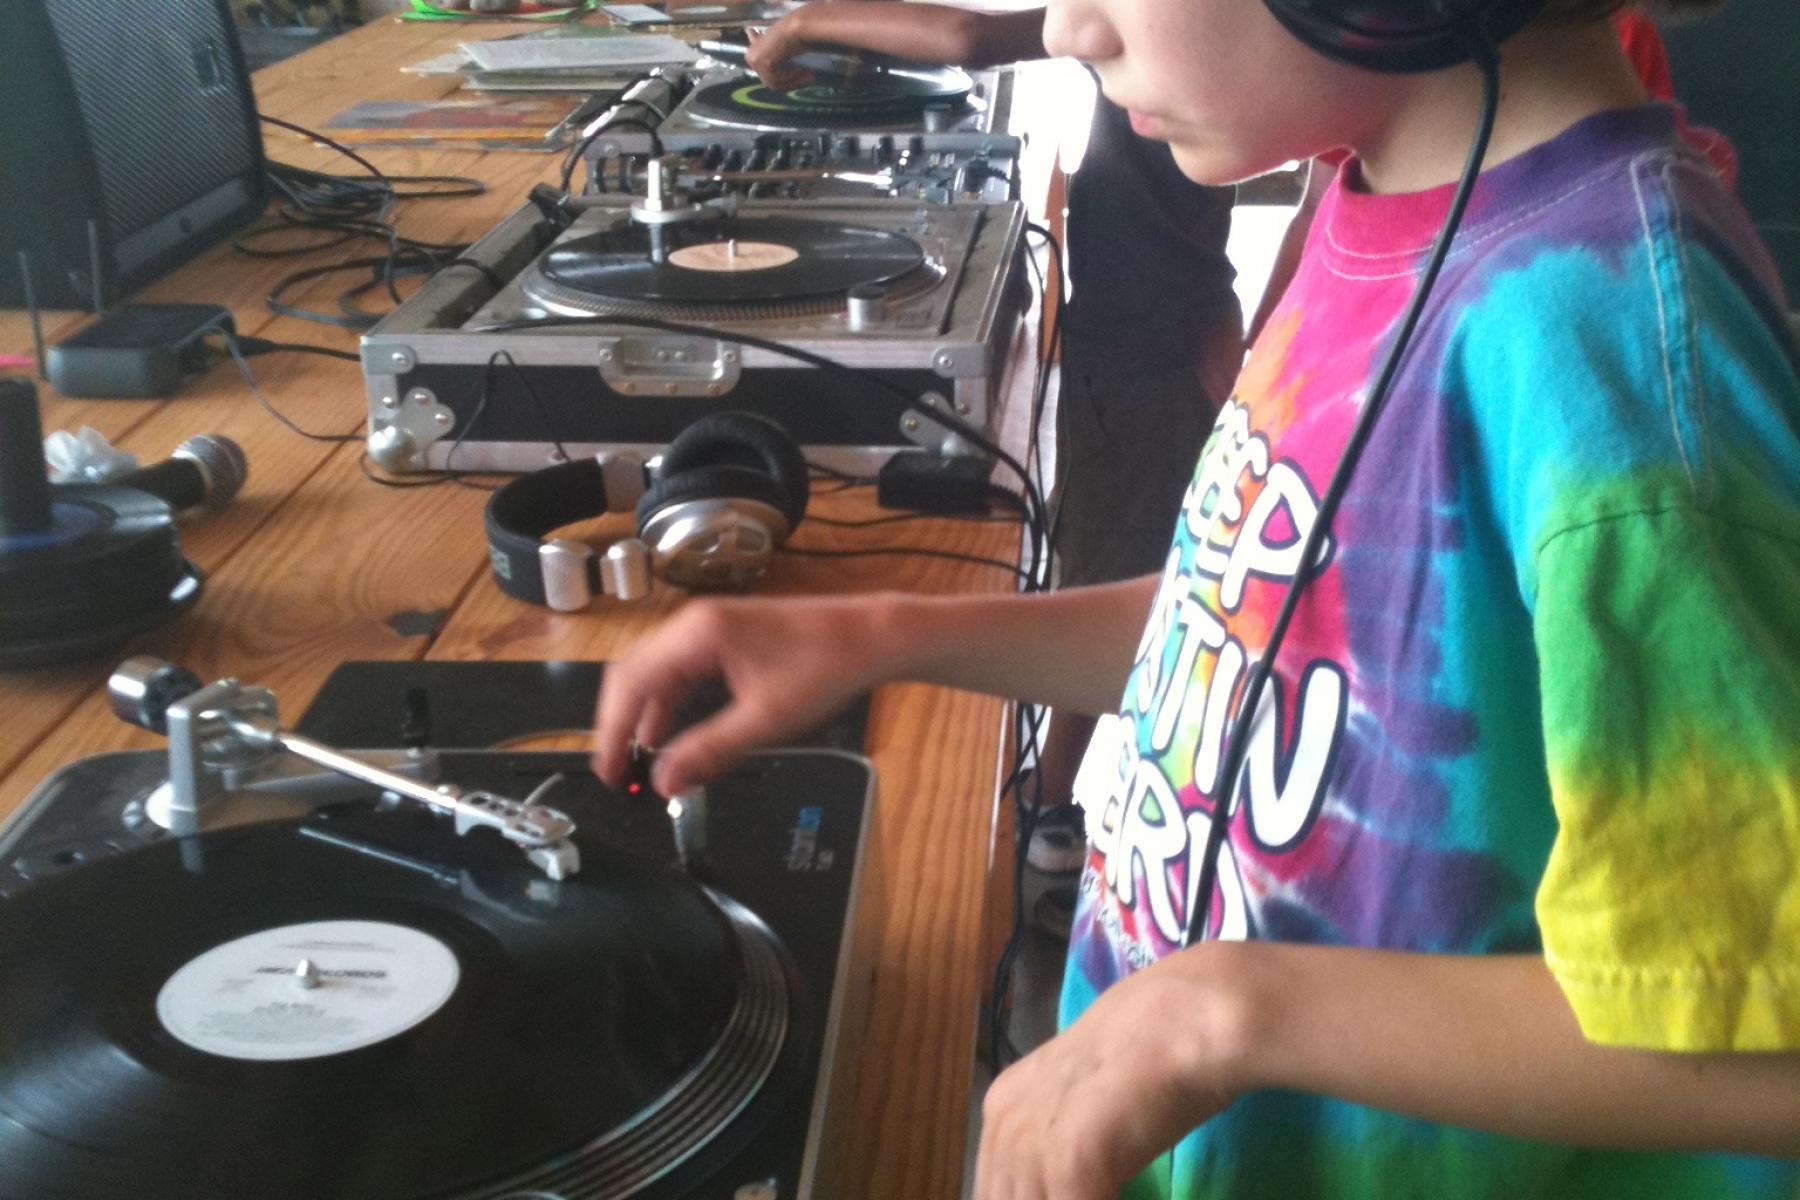 Student at 2011 DJ Camp. Photo by JD DiFabbio.